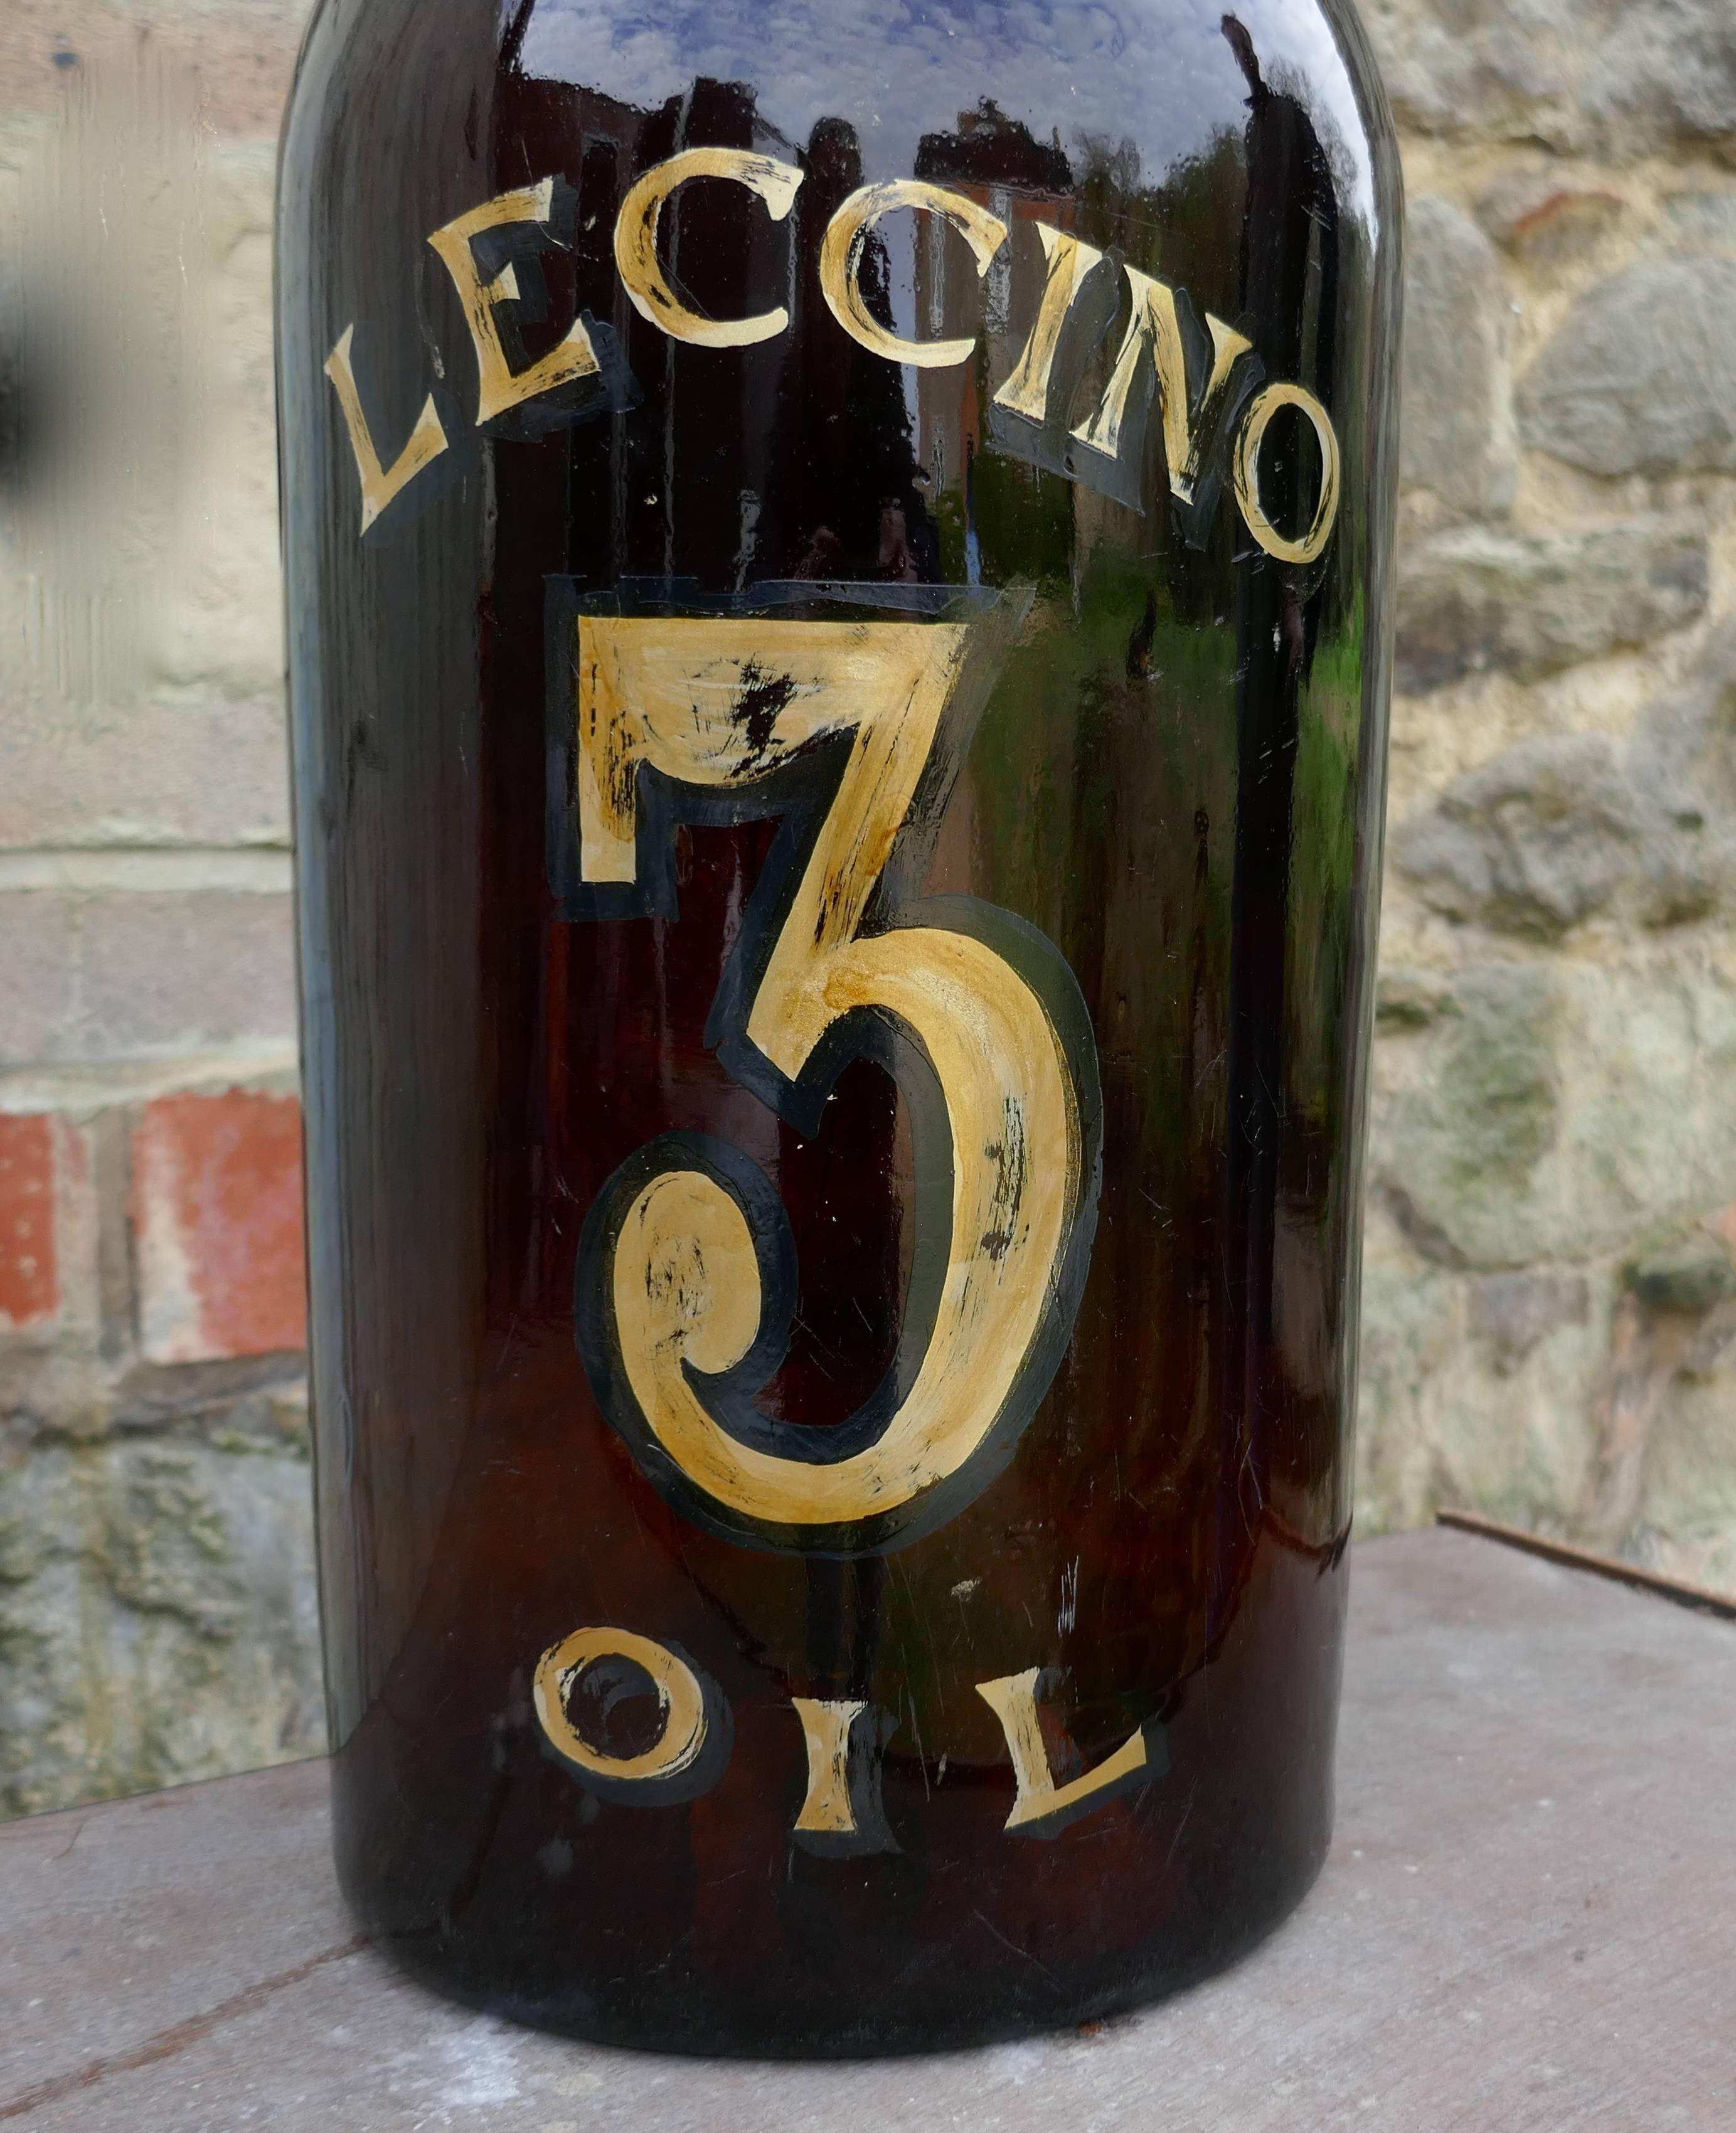 This is a super display piece, the bottle is made in brown glass, on the front it has the number 3 and LECCINO OIL in gold
The bottle is in god condition with only minor scuffing and they gold writing is in good condition
The bottle is 24” tall